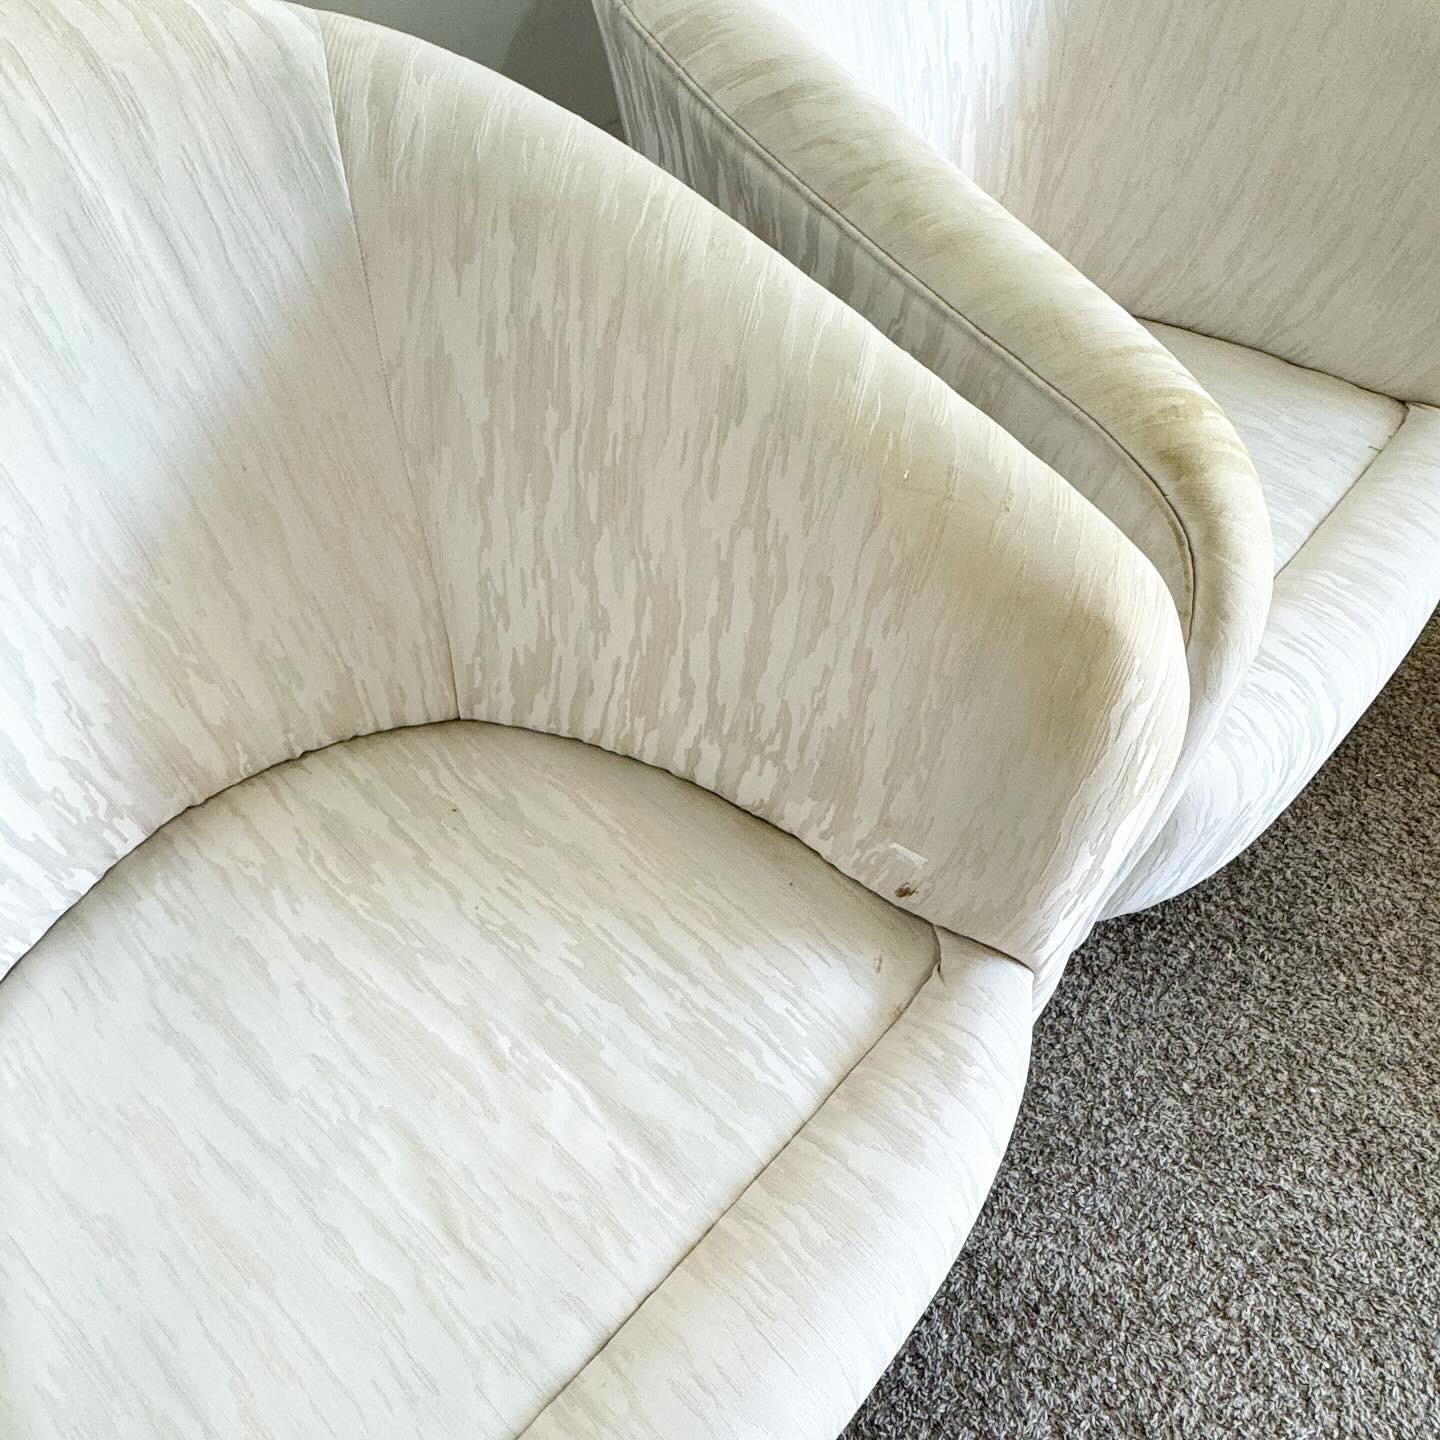 Postmodern Tufted Barrel Swivel Chairs - a Pair For Sale 4